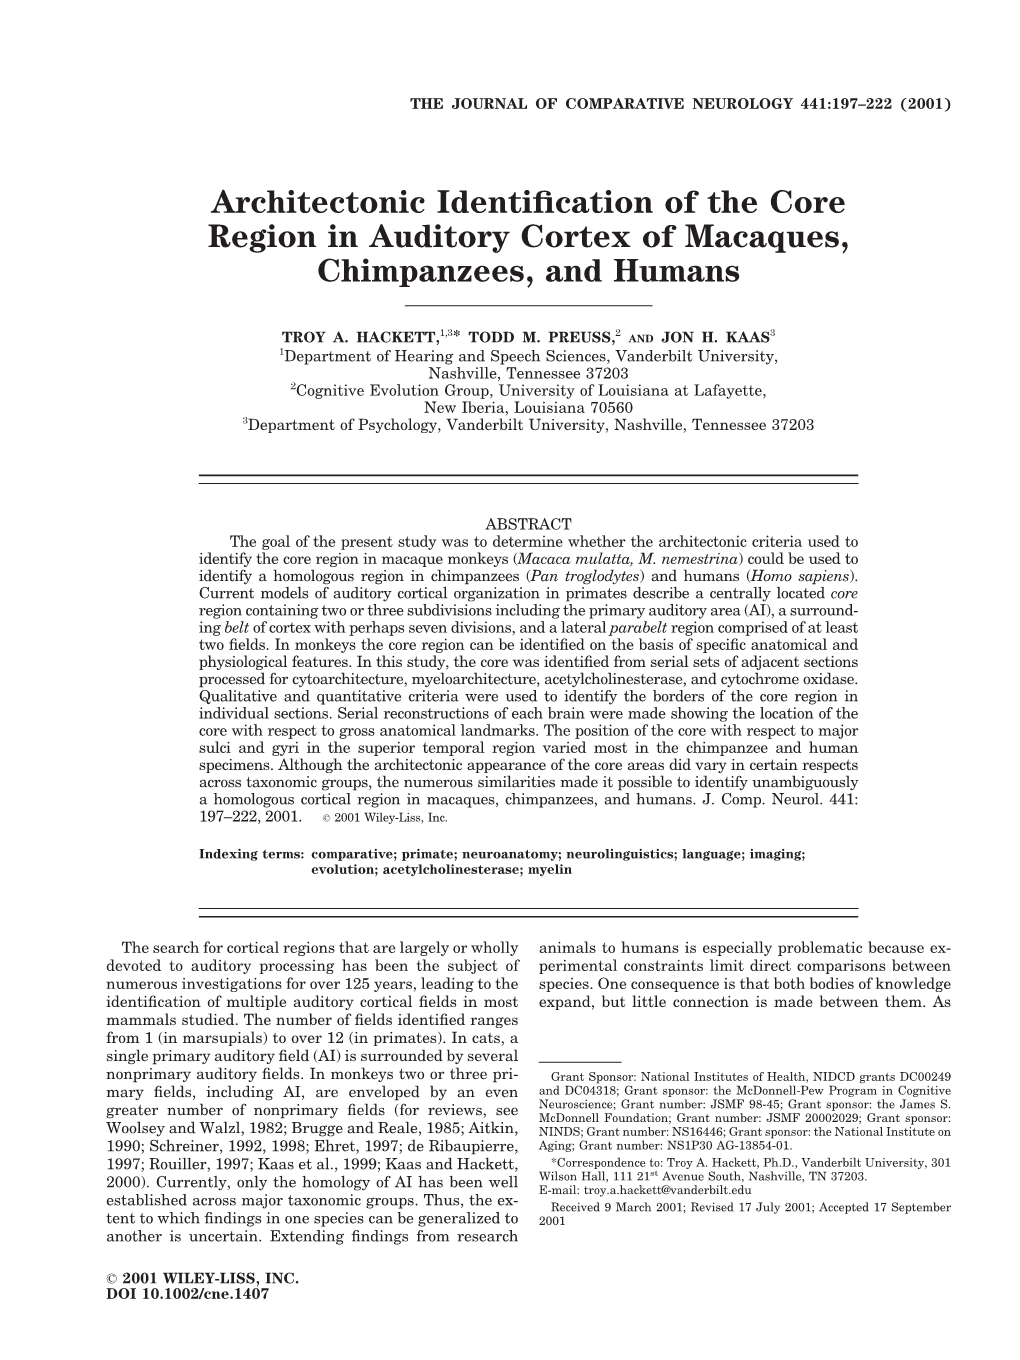 Architectonic Identification of the Core Region in Auditory Cortex Of